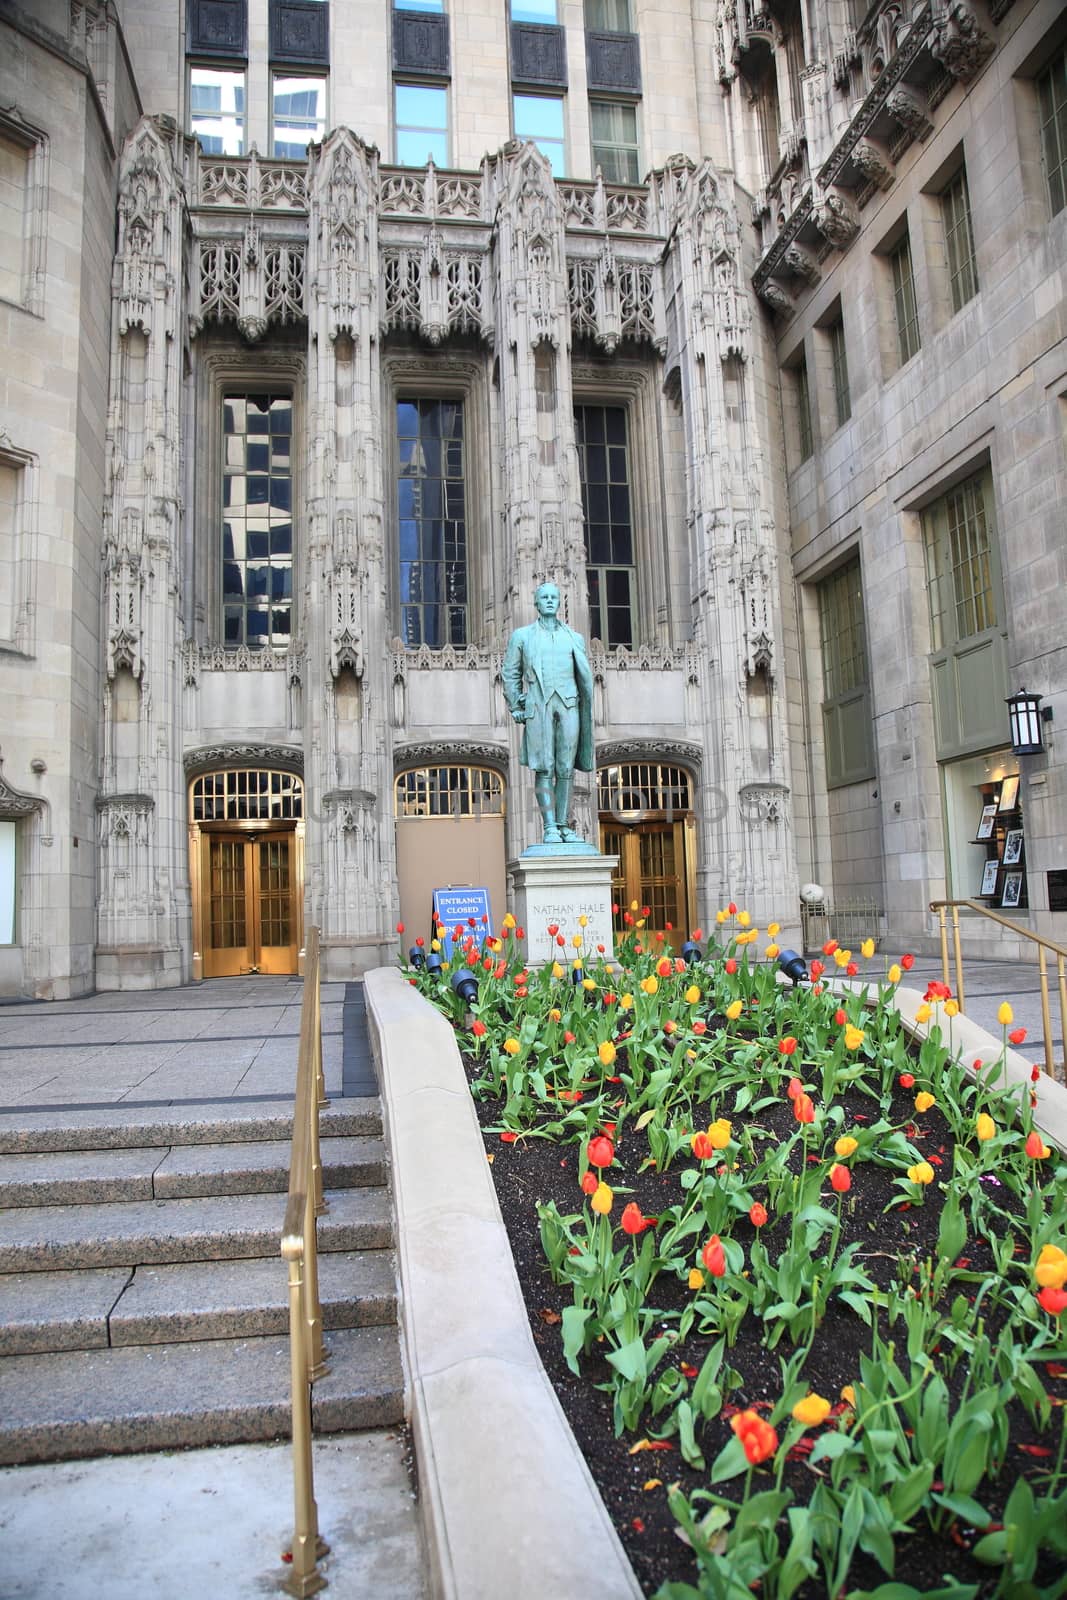 Nathan Hale Statue outside the Tribune Tower in Chicago, Illinois. The Chicago Tribune newspaper erected the statue in 1940.